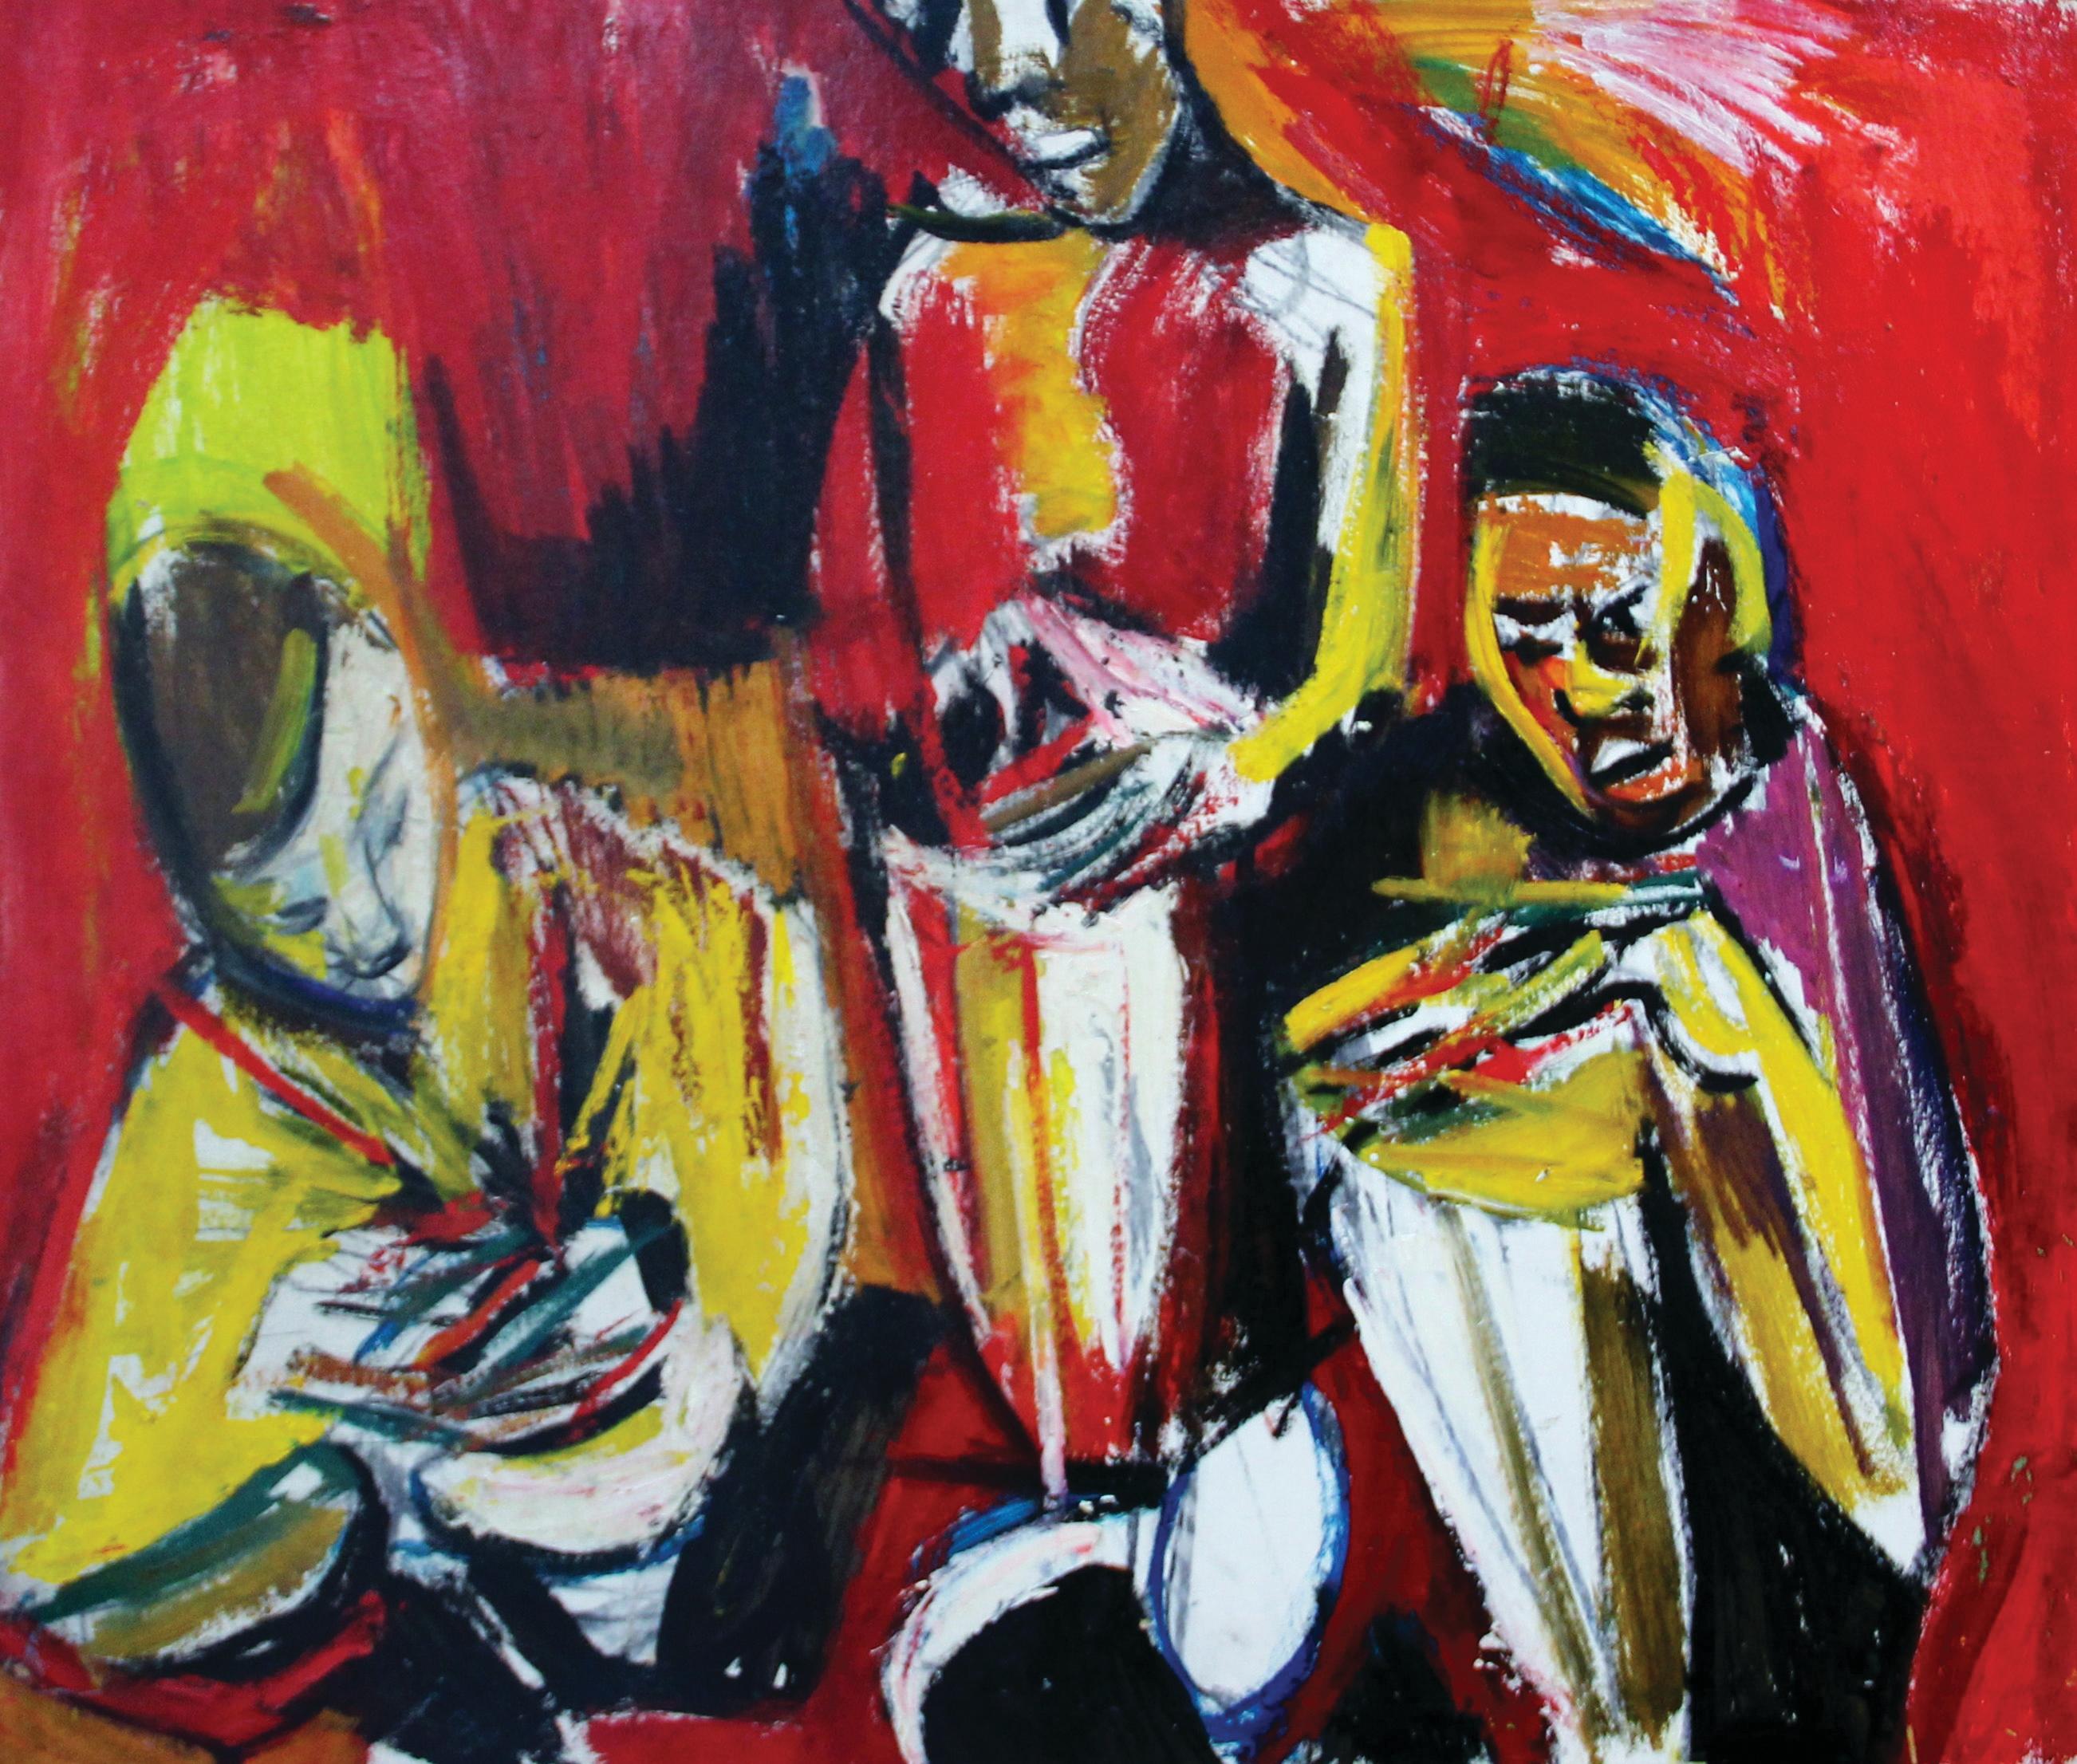 Drums, Expressionist Group Portrait of Three Musicians, African American Art